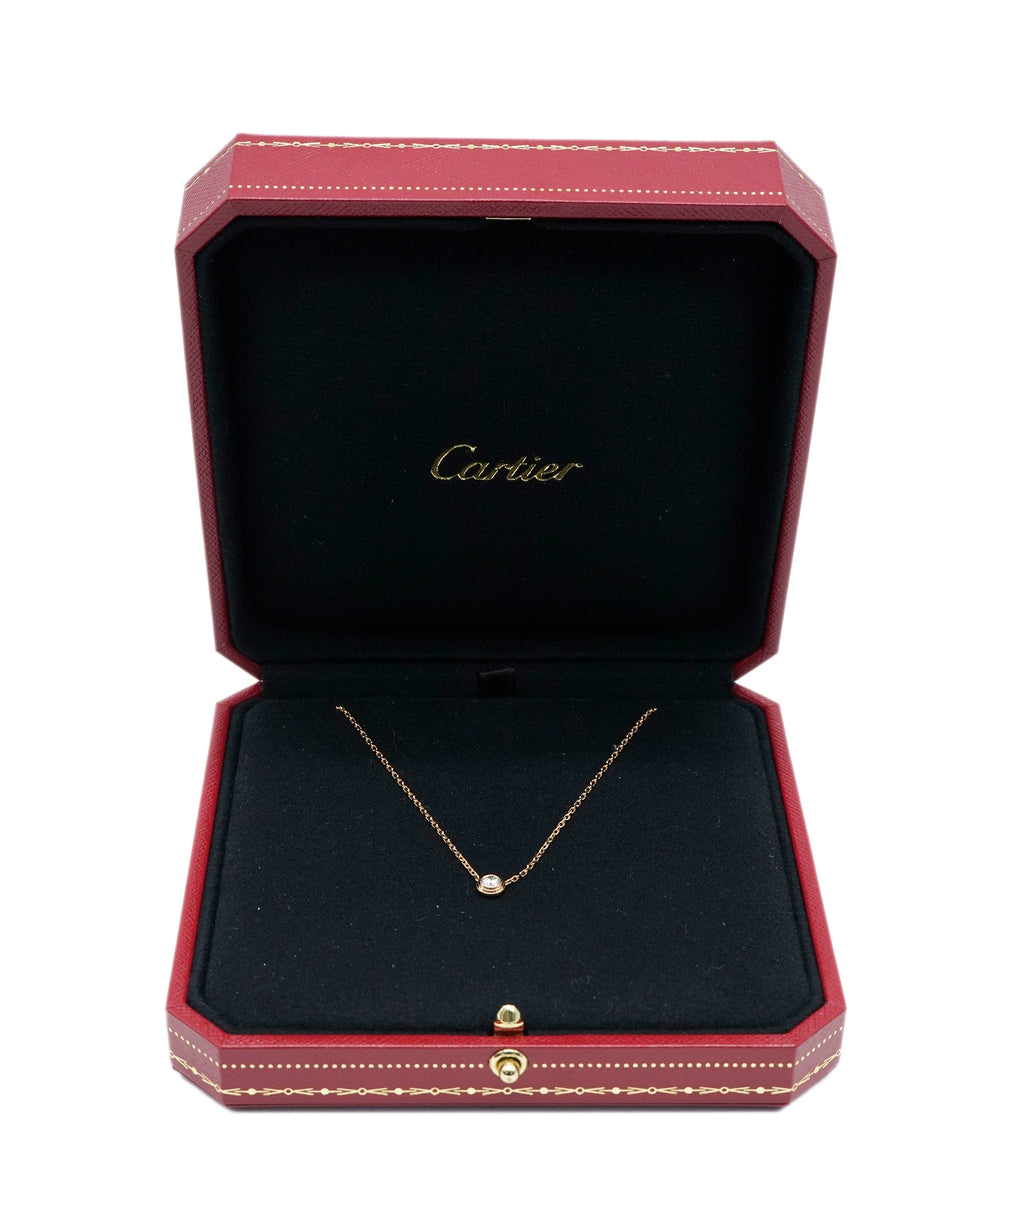 Cartier Women's Necklaces - Certified Jewelry - 58 Facettes